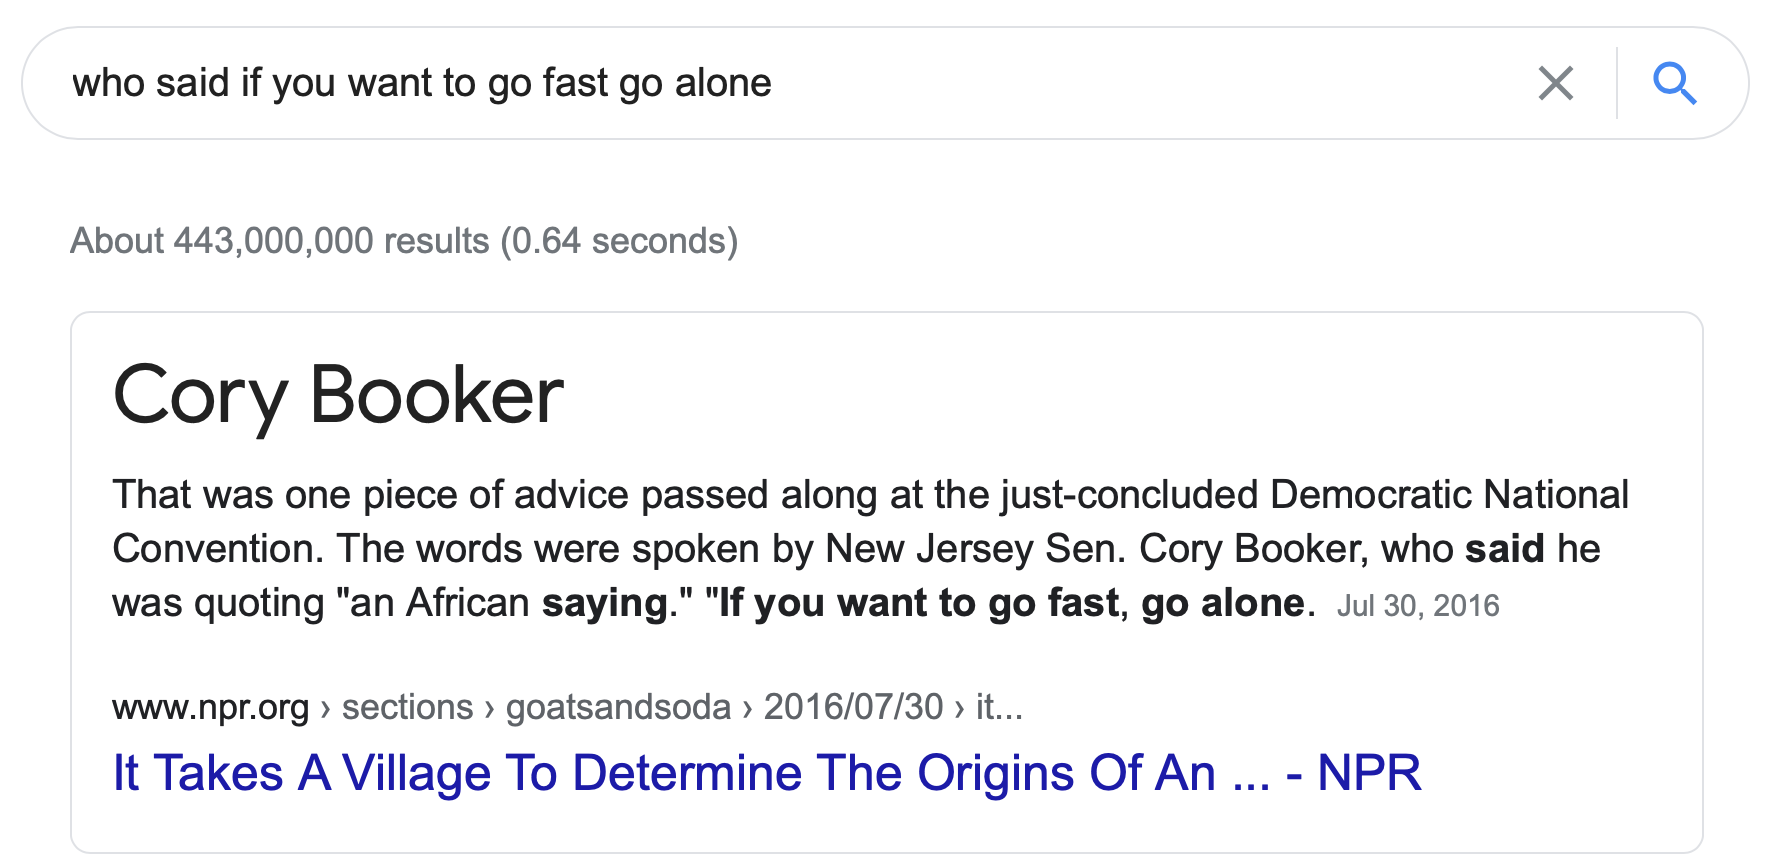 Google's answer to "who said if you want to go fast go alone": Cory Booker